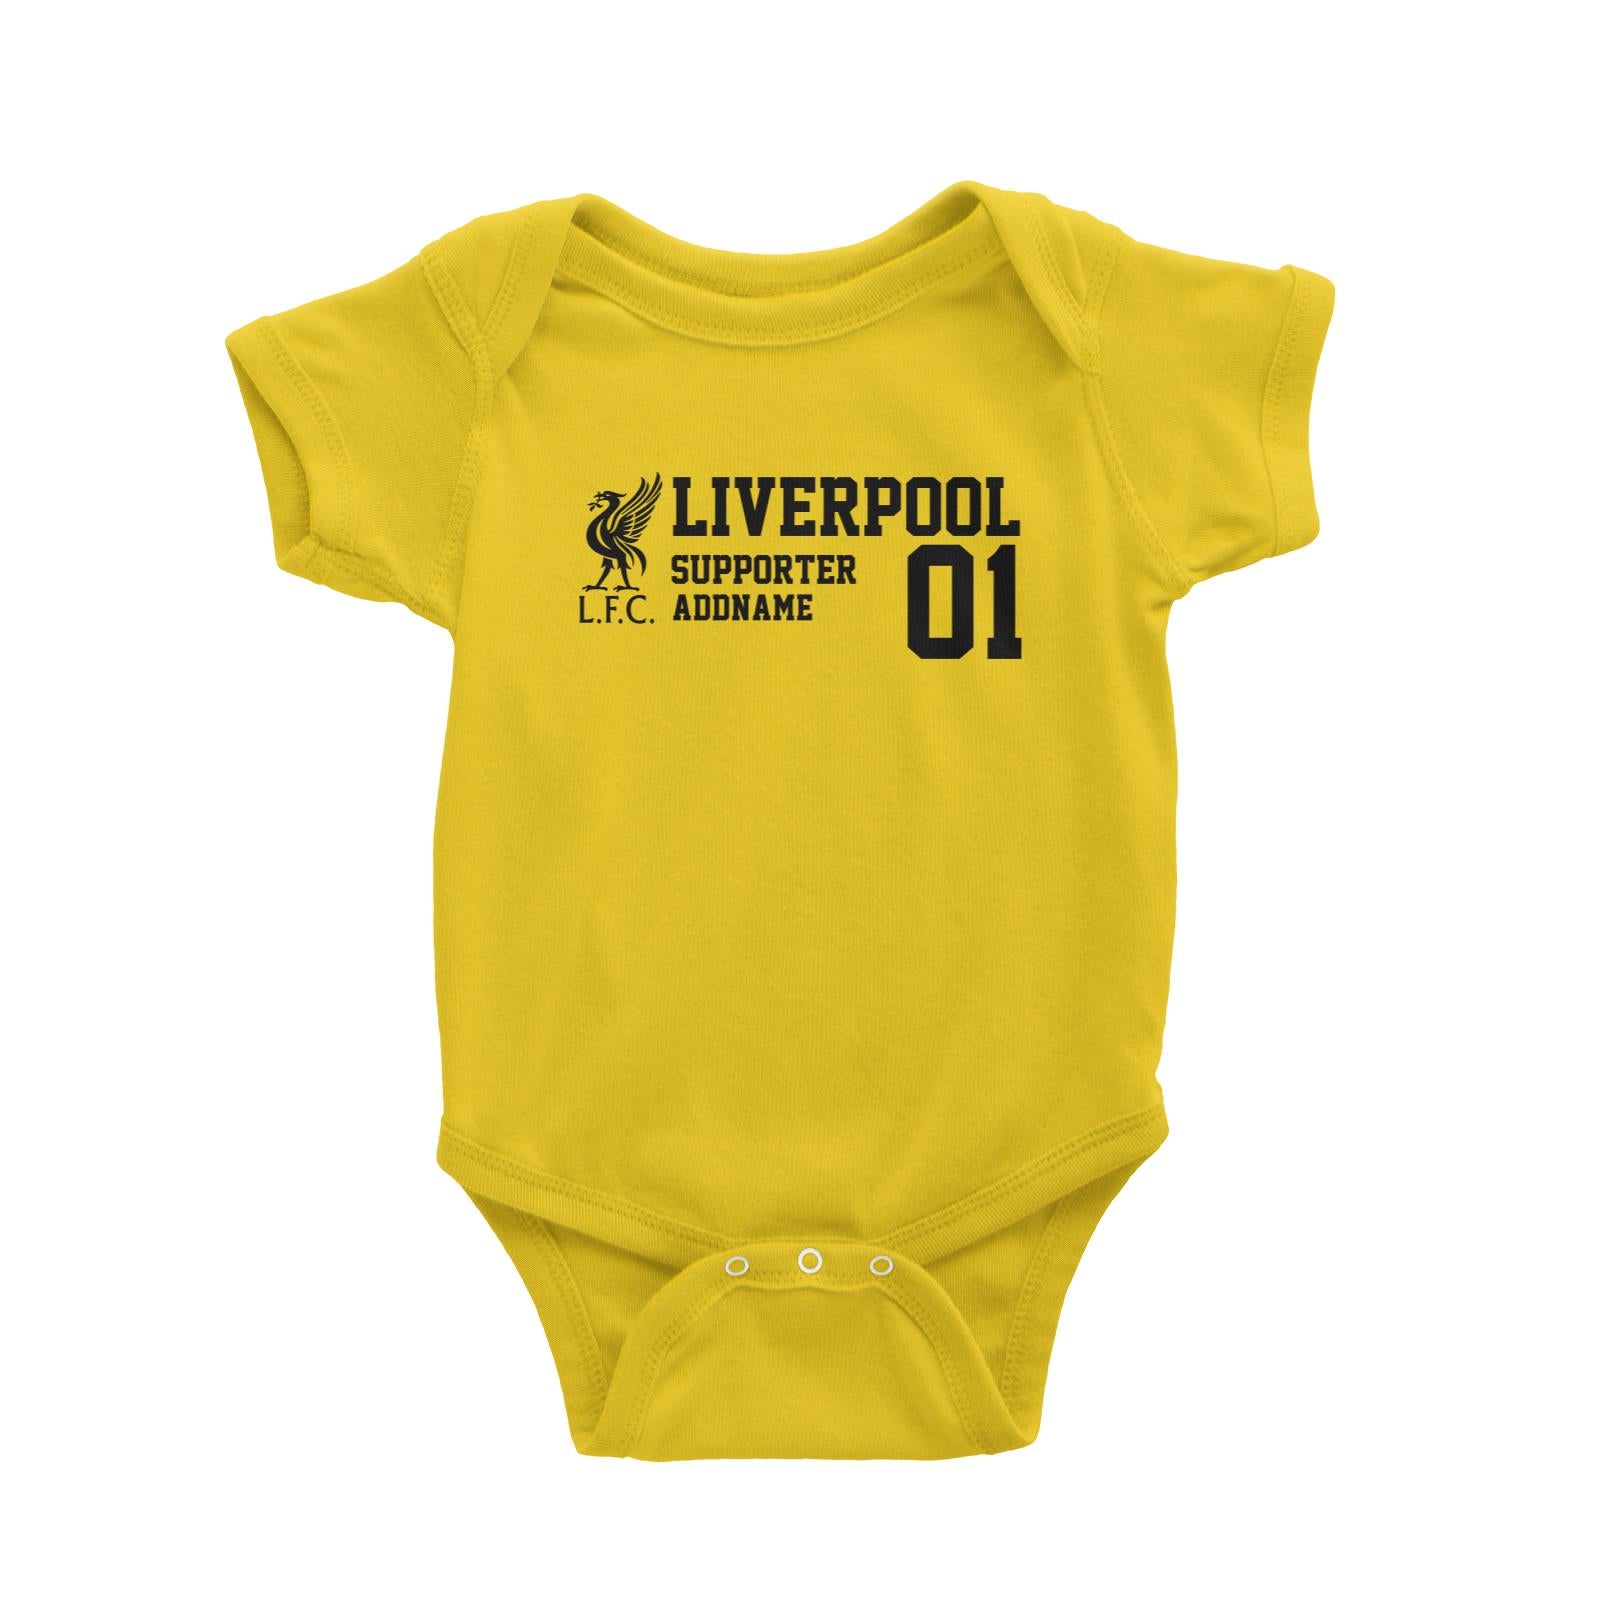 Liverpool Football Supporter Addname Baby Romper